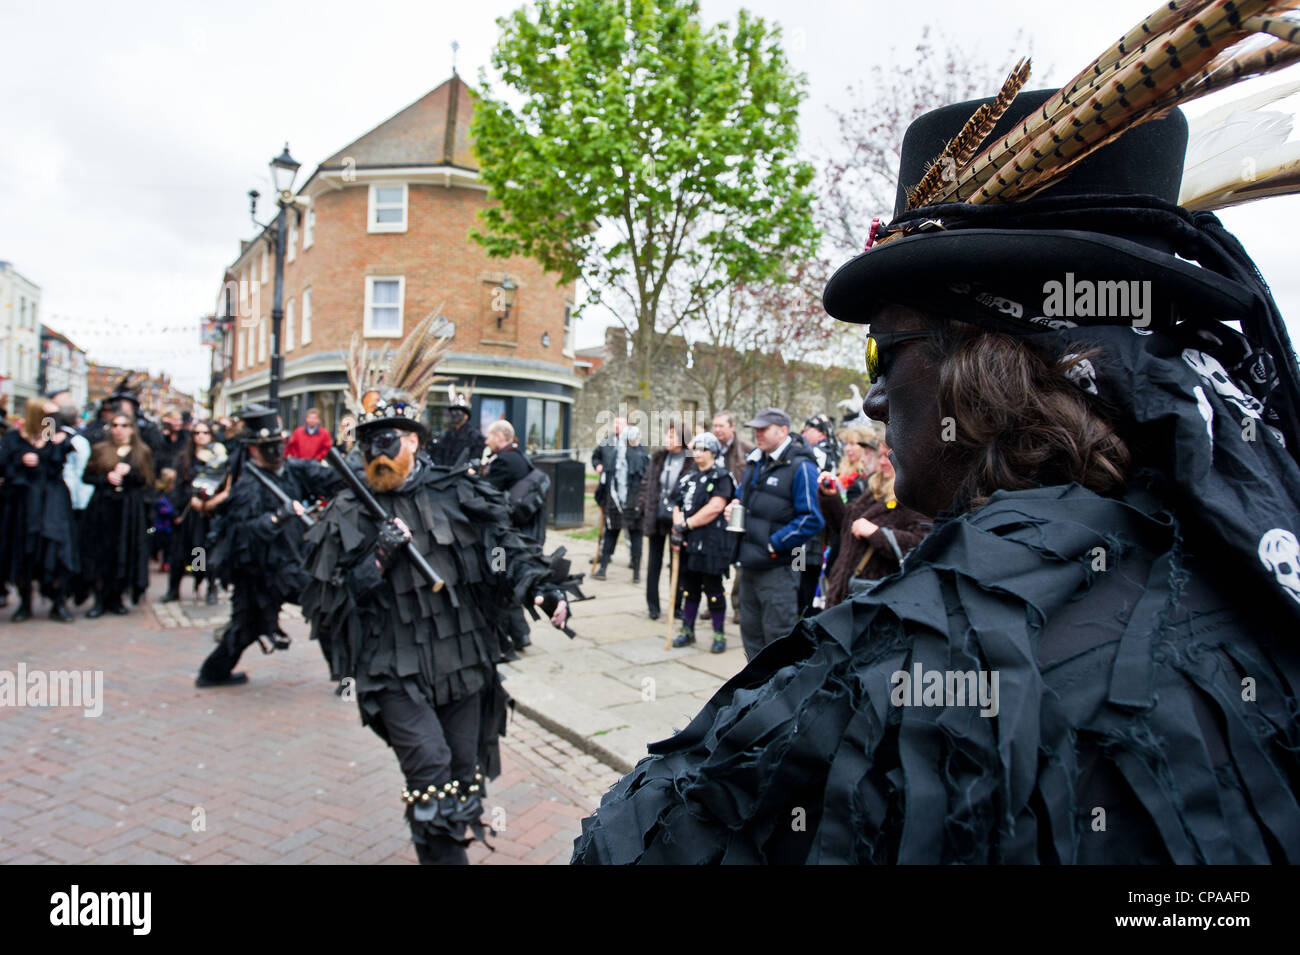 Wlfs Head and Vixen Border Morris performing at the Sweeps festival in Rochester Kent Stock Photo